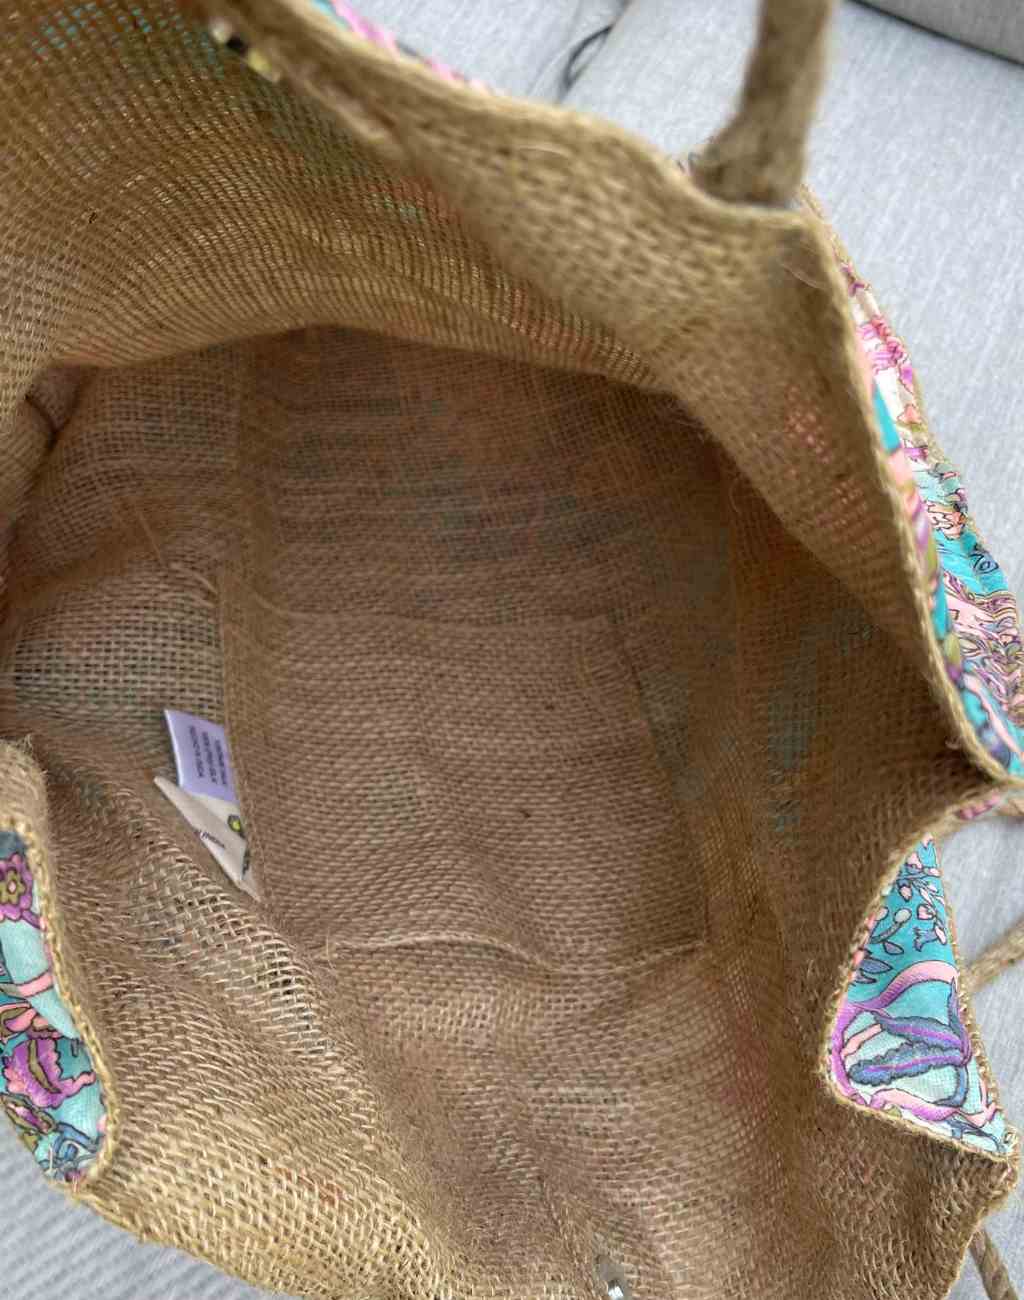 Vintage Silk Covered Jute Tote Bag in Cream, Turquoise, and Pink